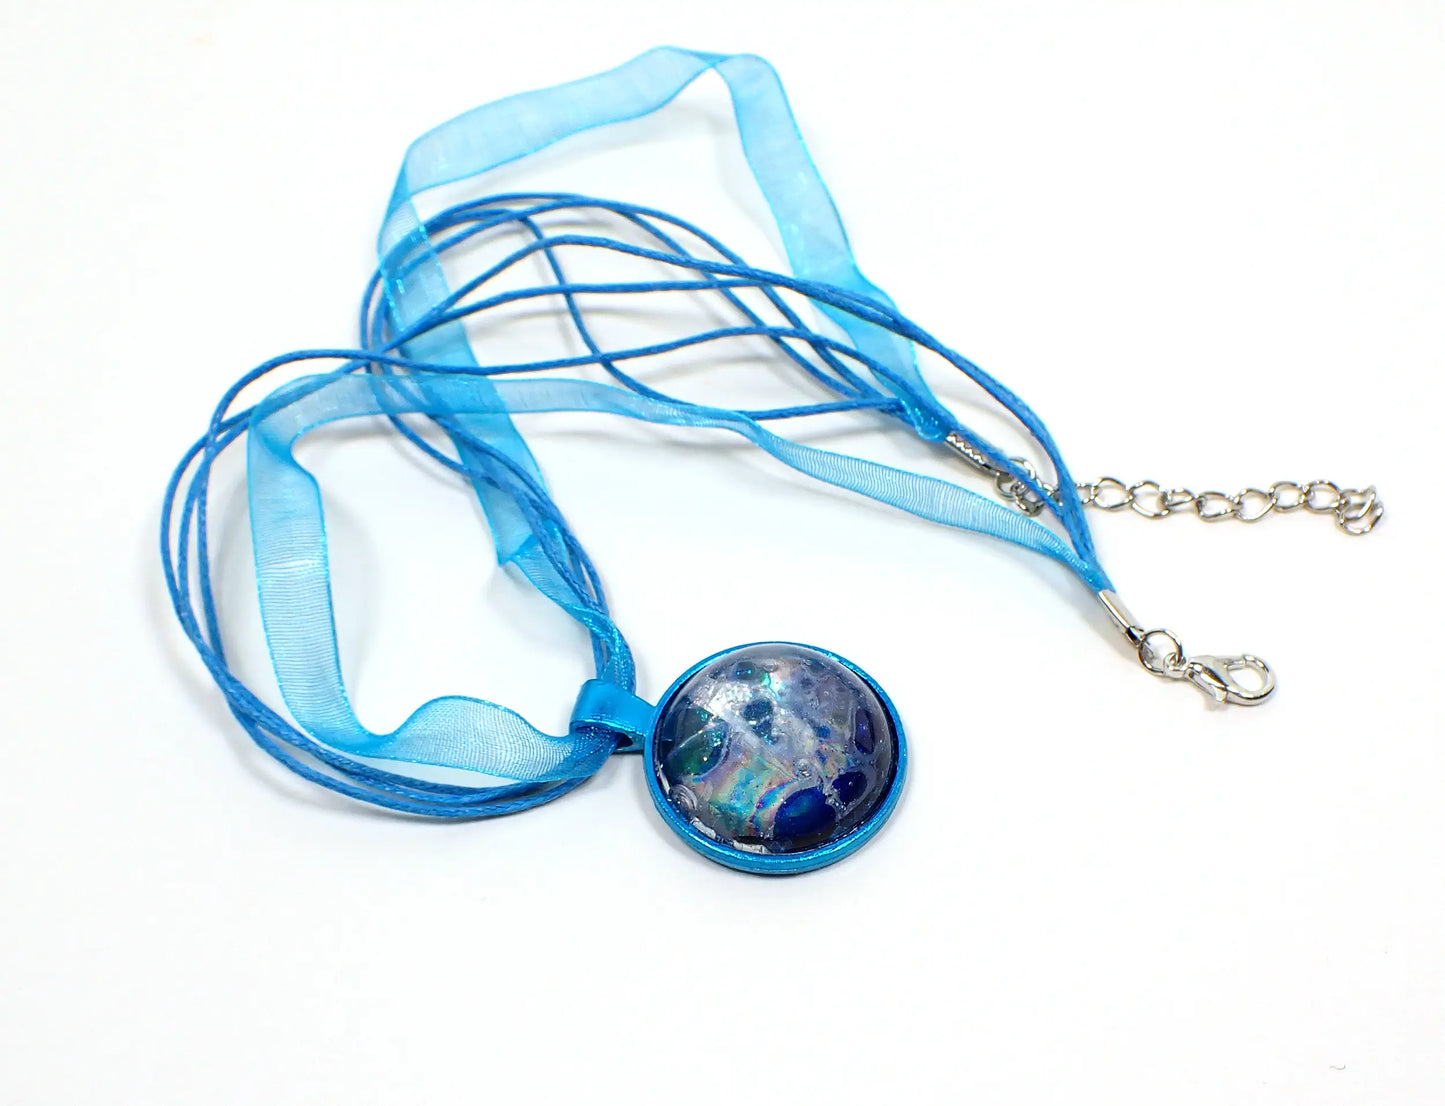 Handmade Round Aqua Blue Resin Pendant Necklace with Abstract Design